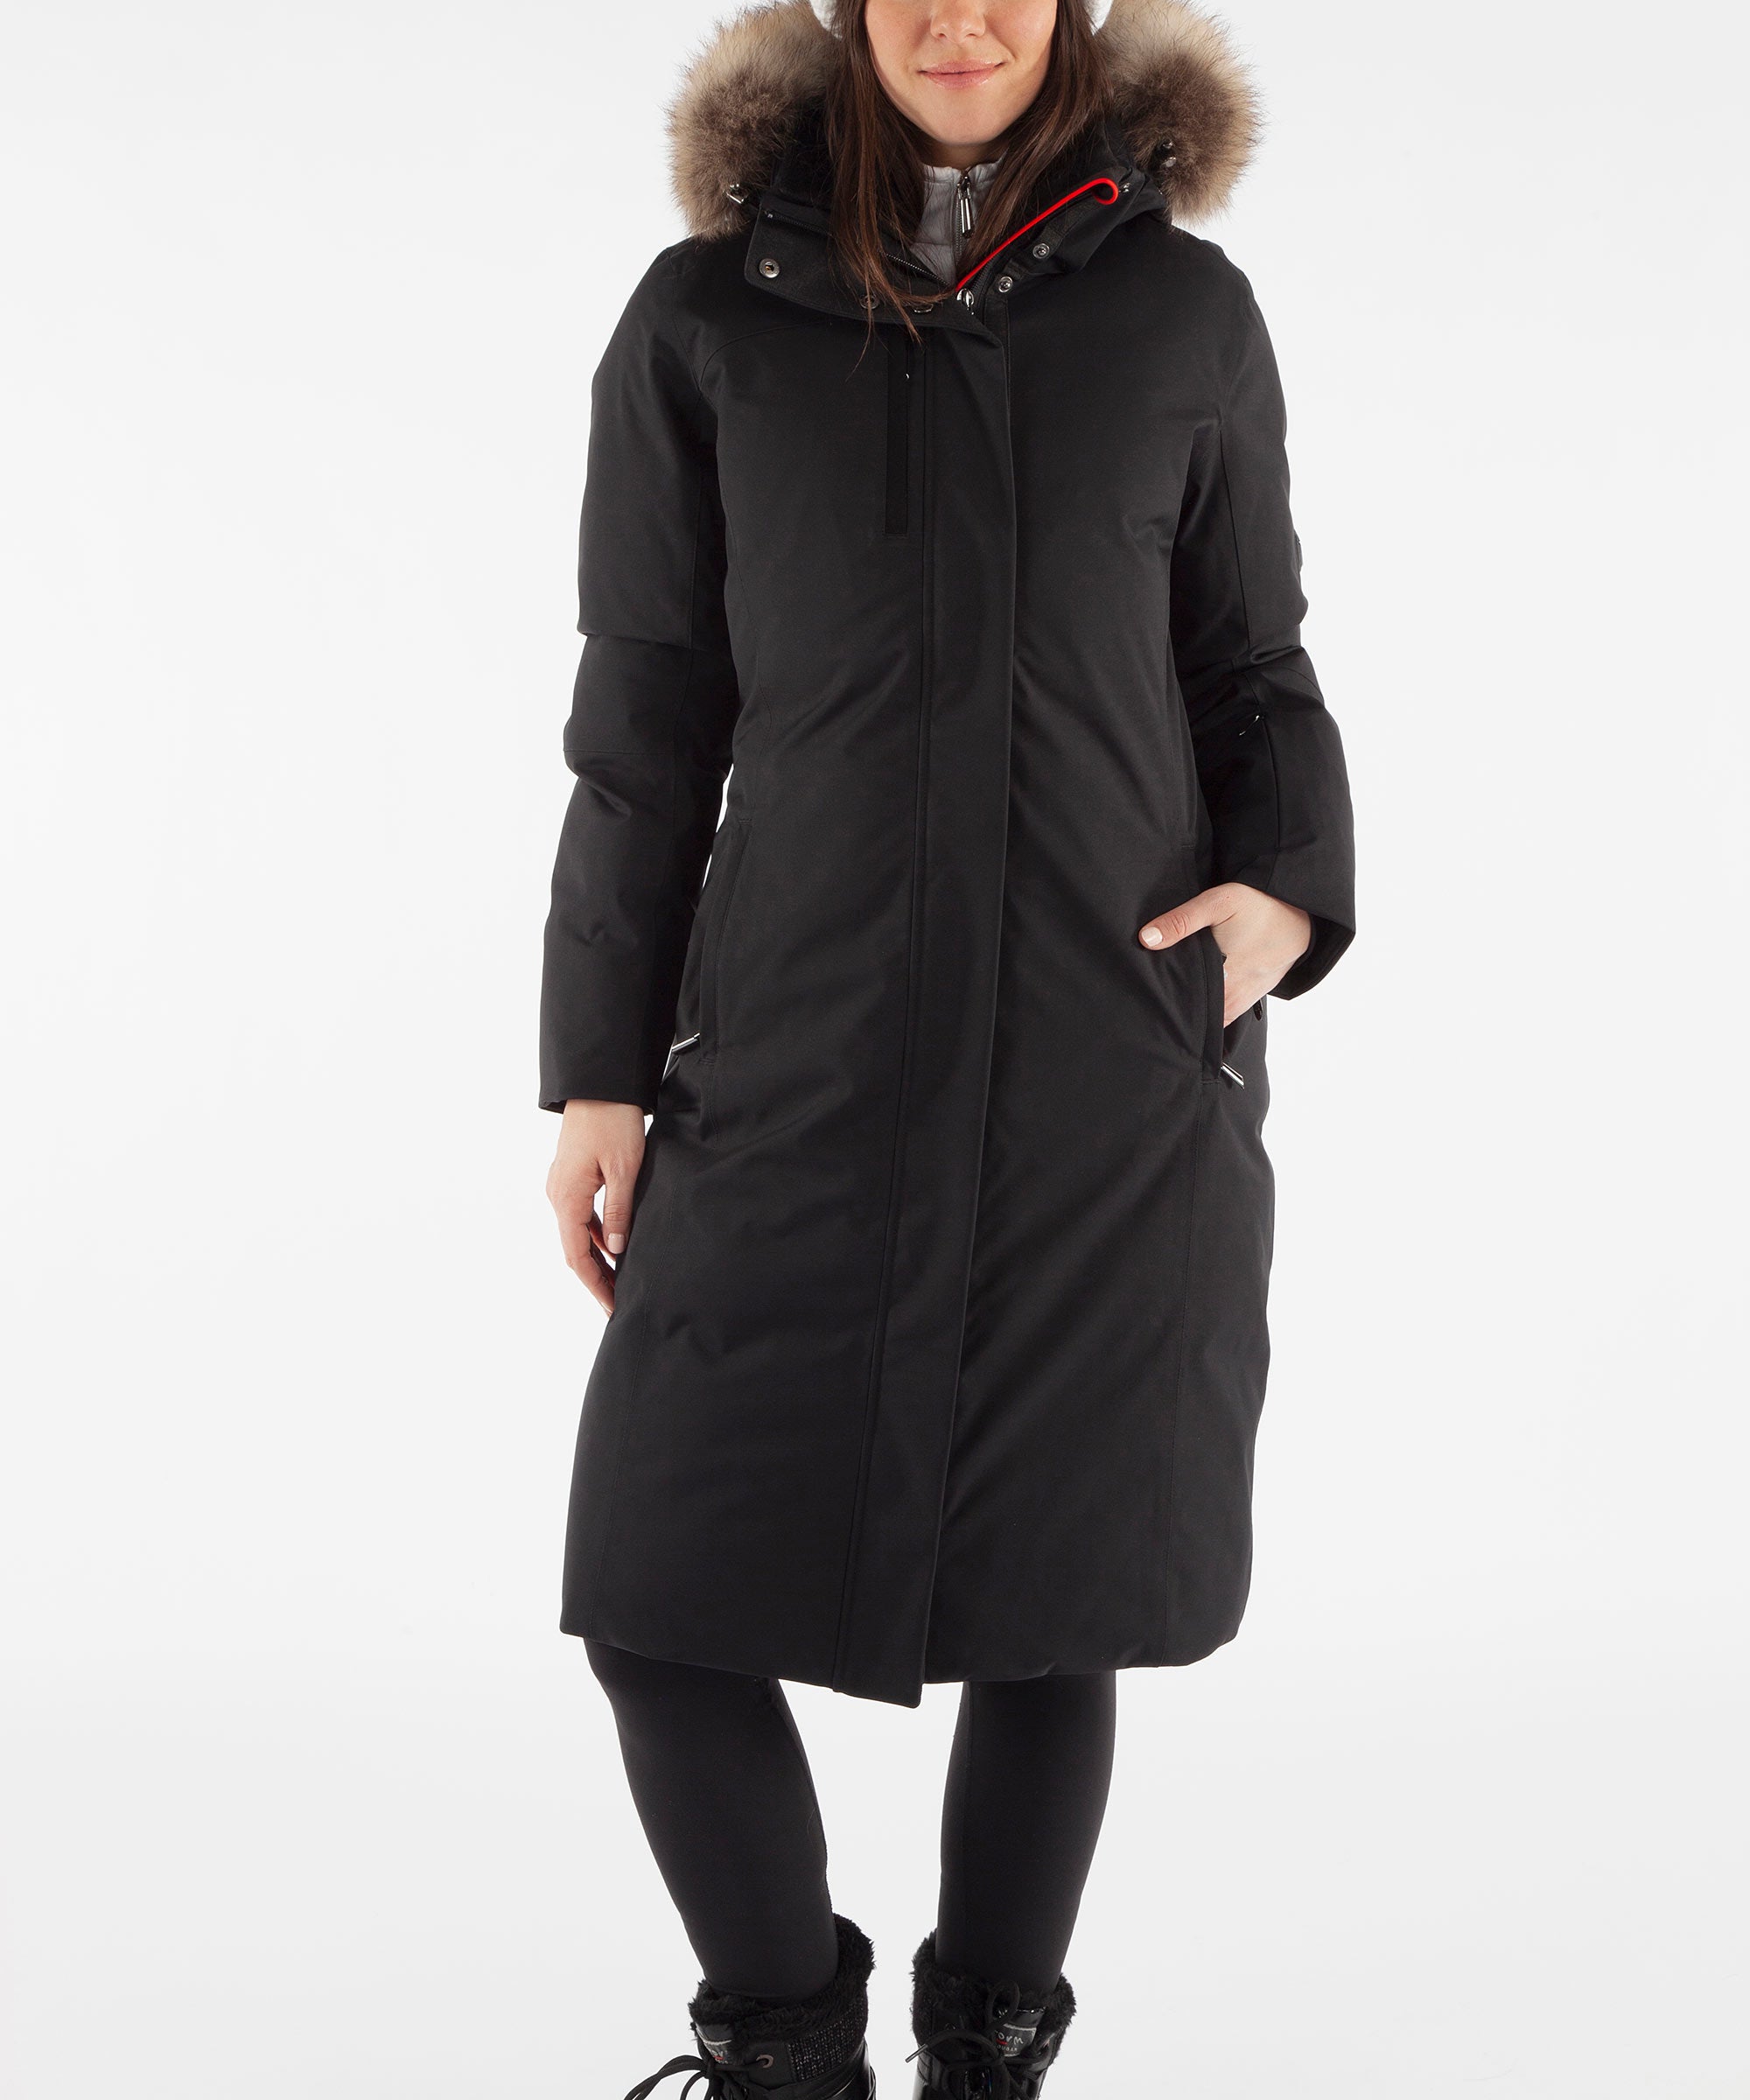 Women's Hillary Insulated Long Parka Coat with Removable Fur Ruff - Sunice